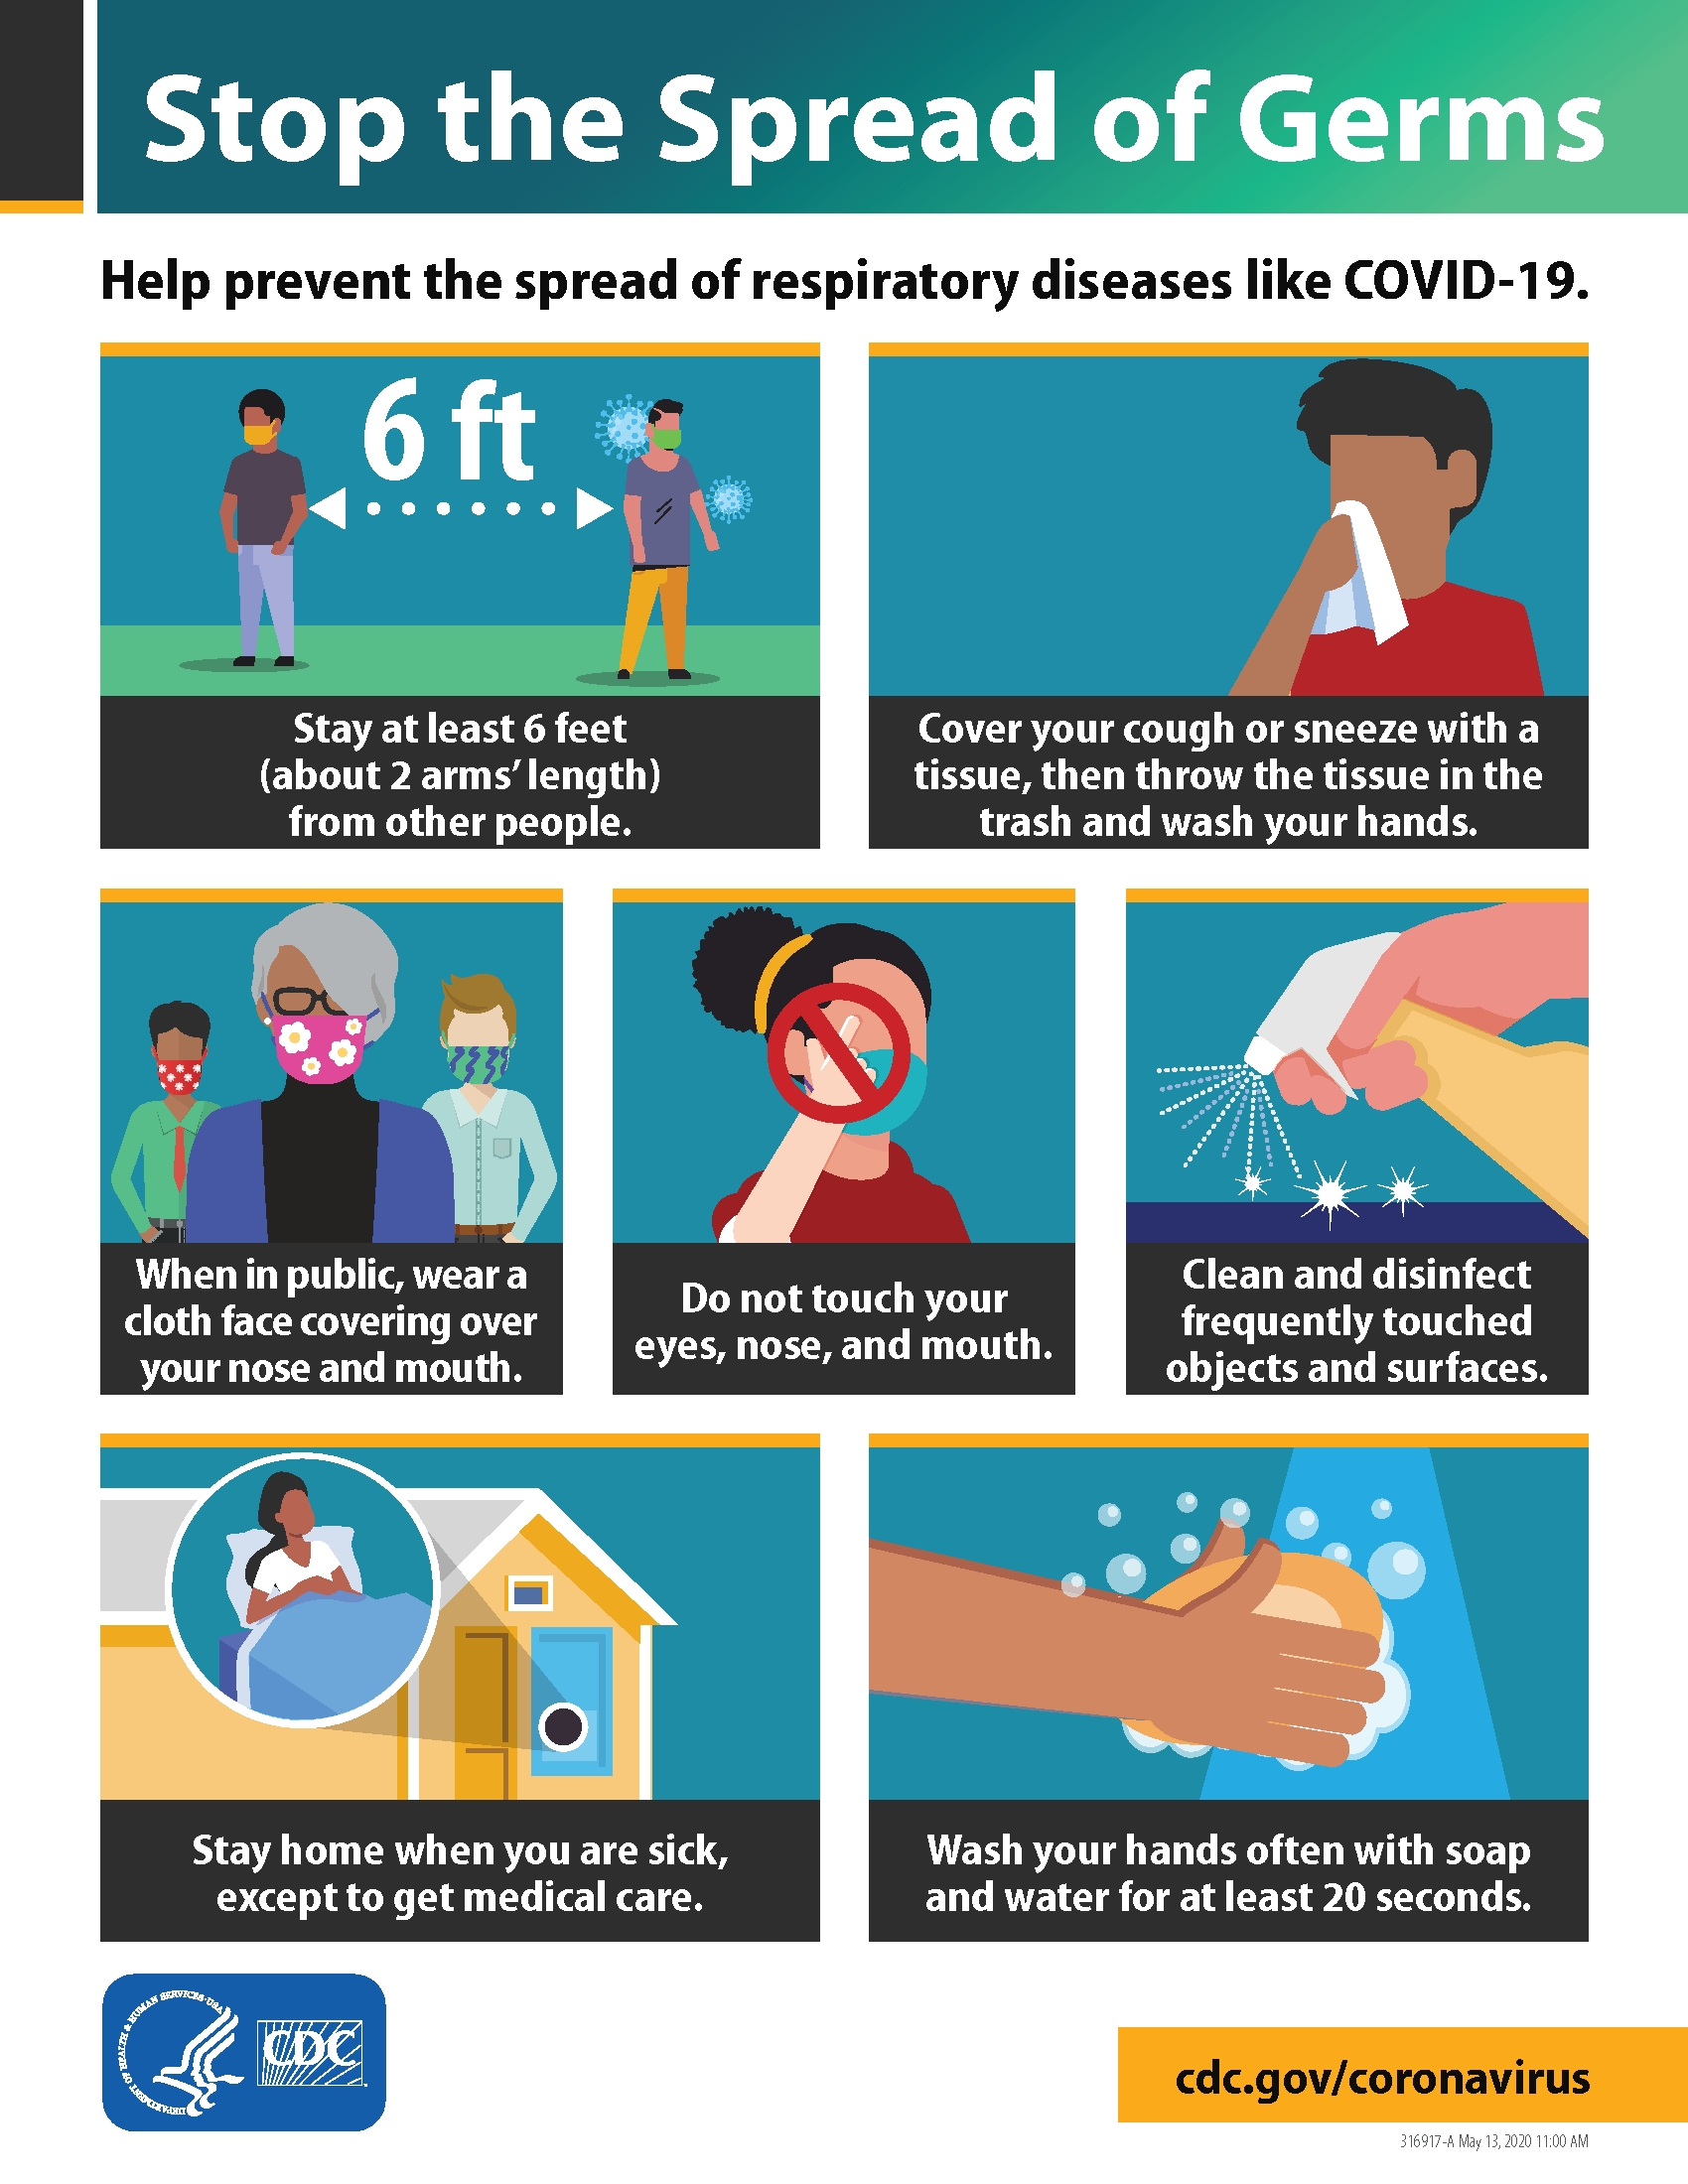 Stop the Spread of Germs Poster (CDC)